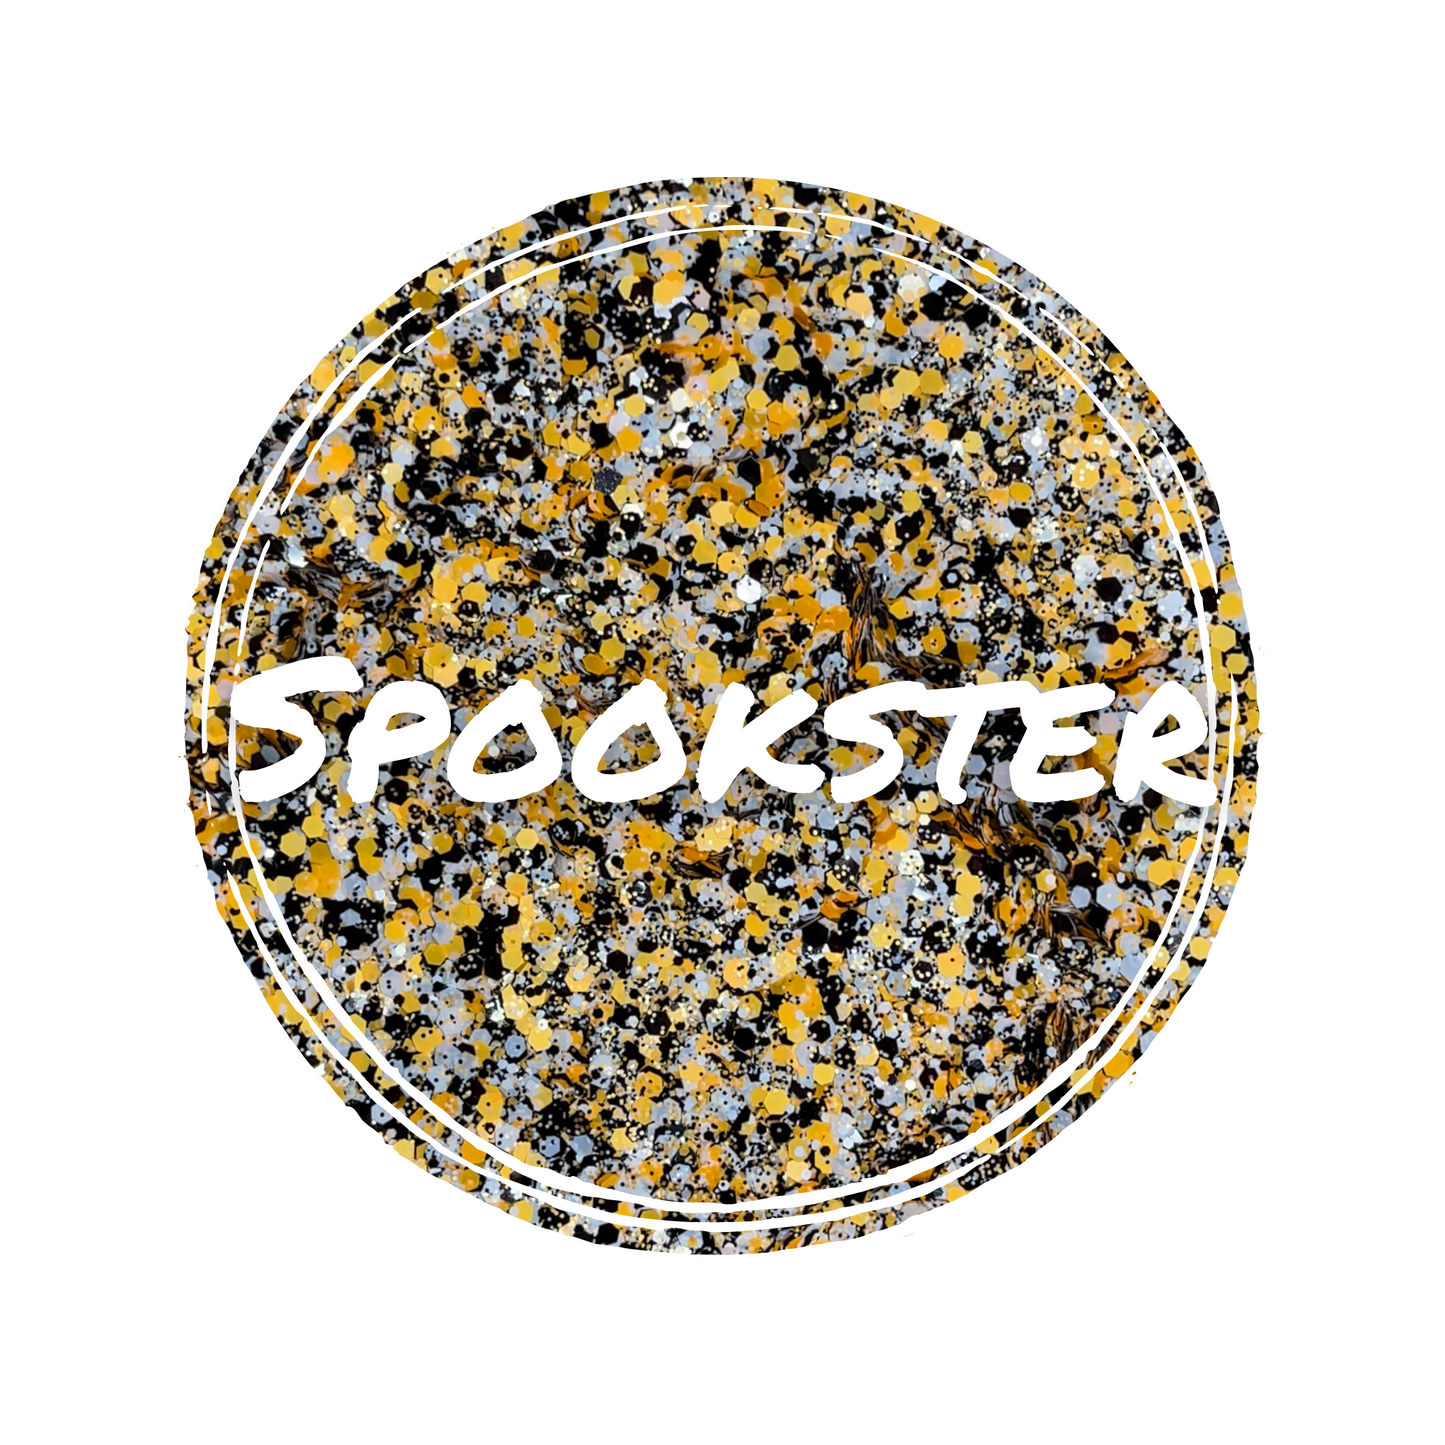 Spookster